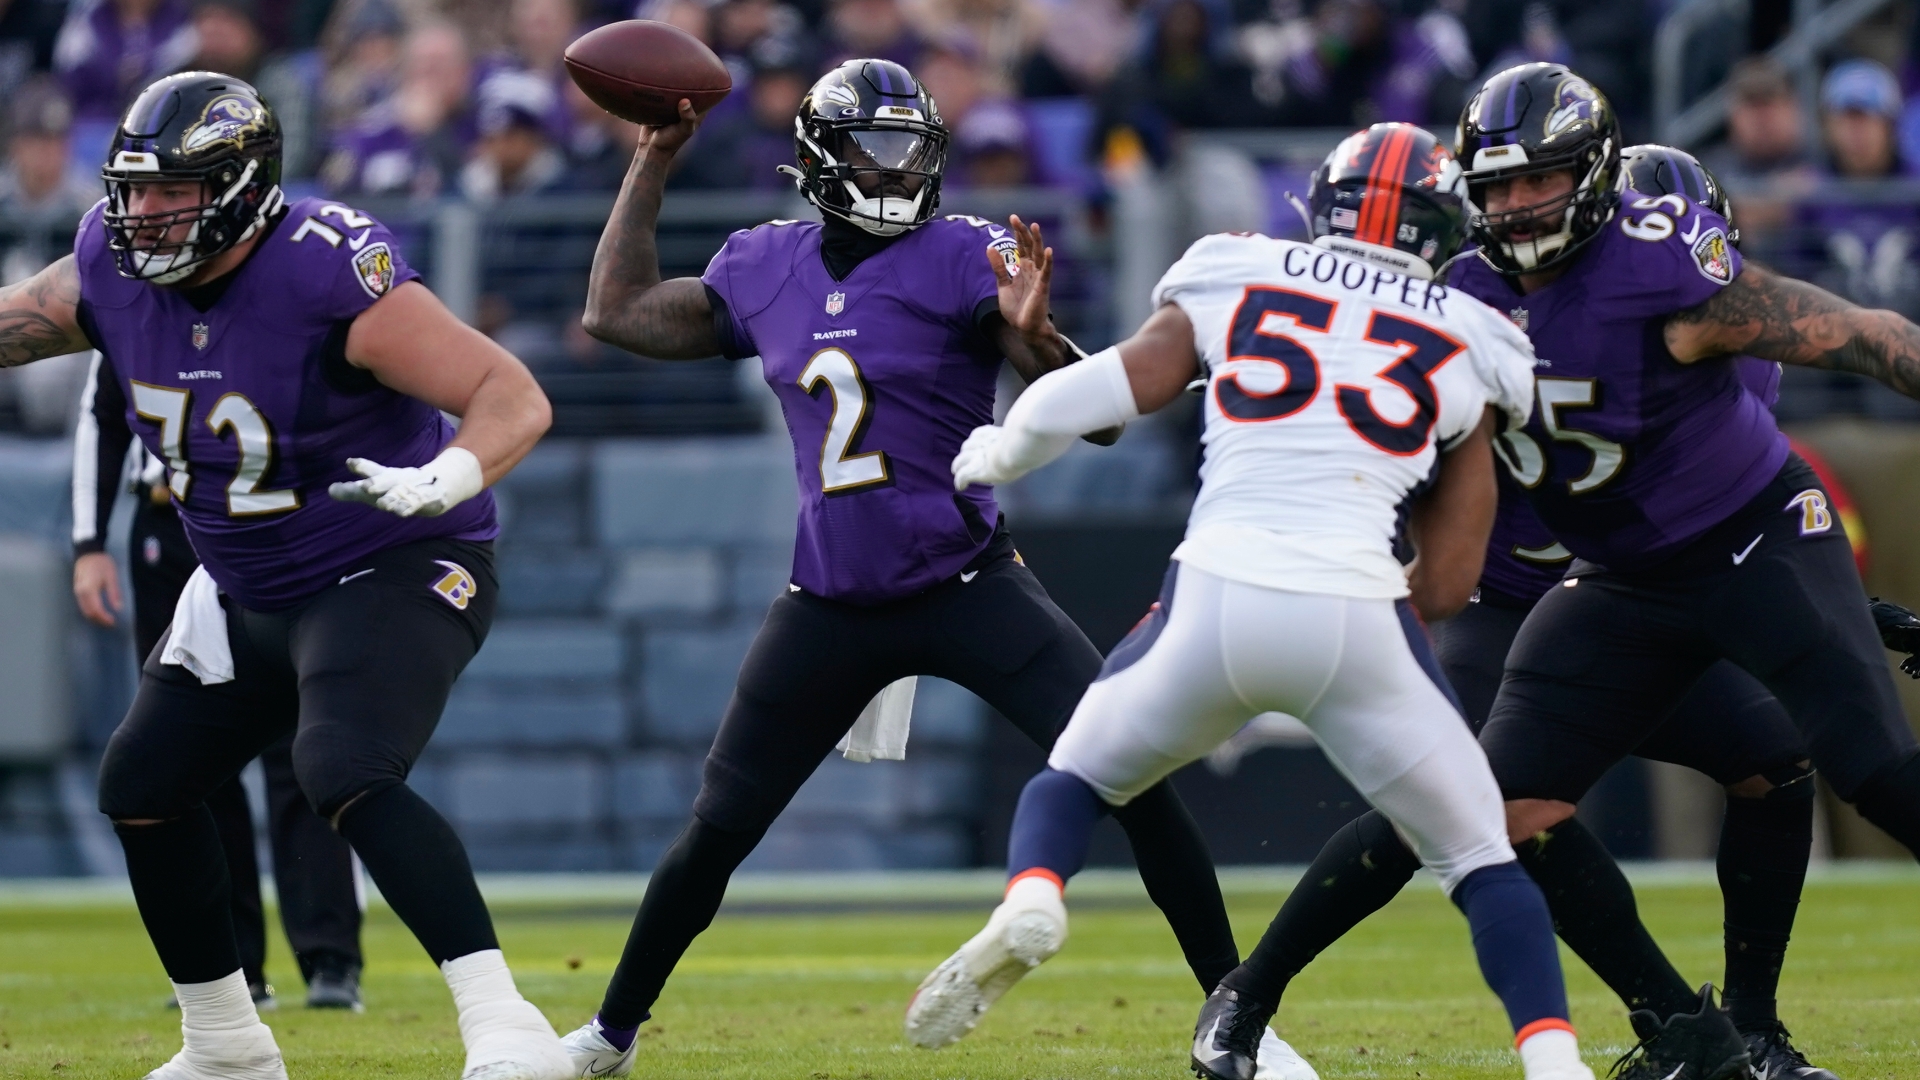 Mike Preston: With QB Lamar Jackson injured, backup Tyler Huntley showed he  can lead the Ravens